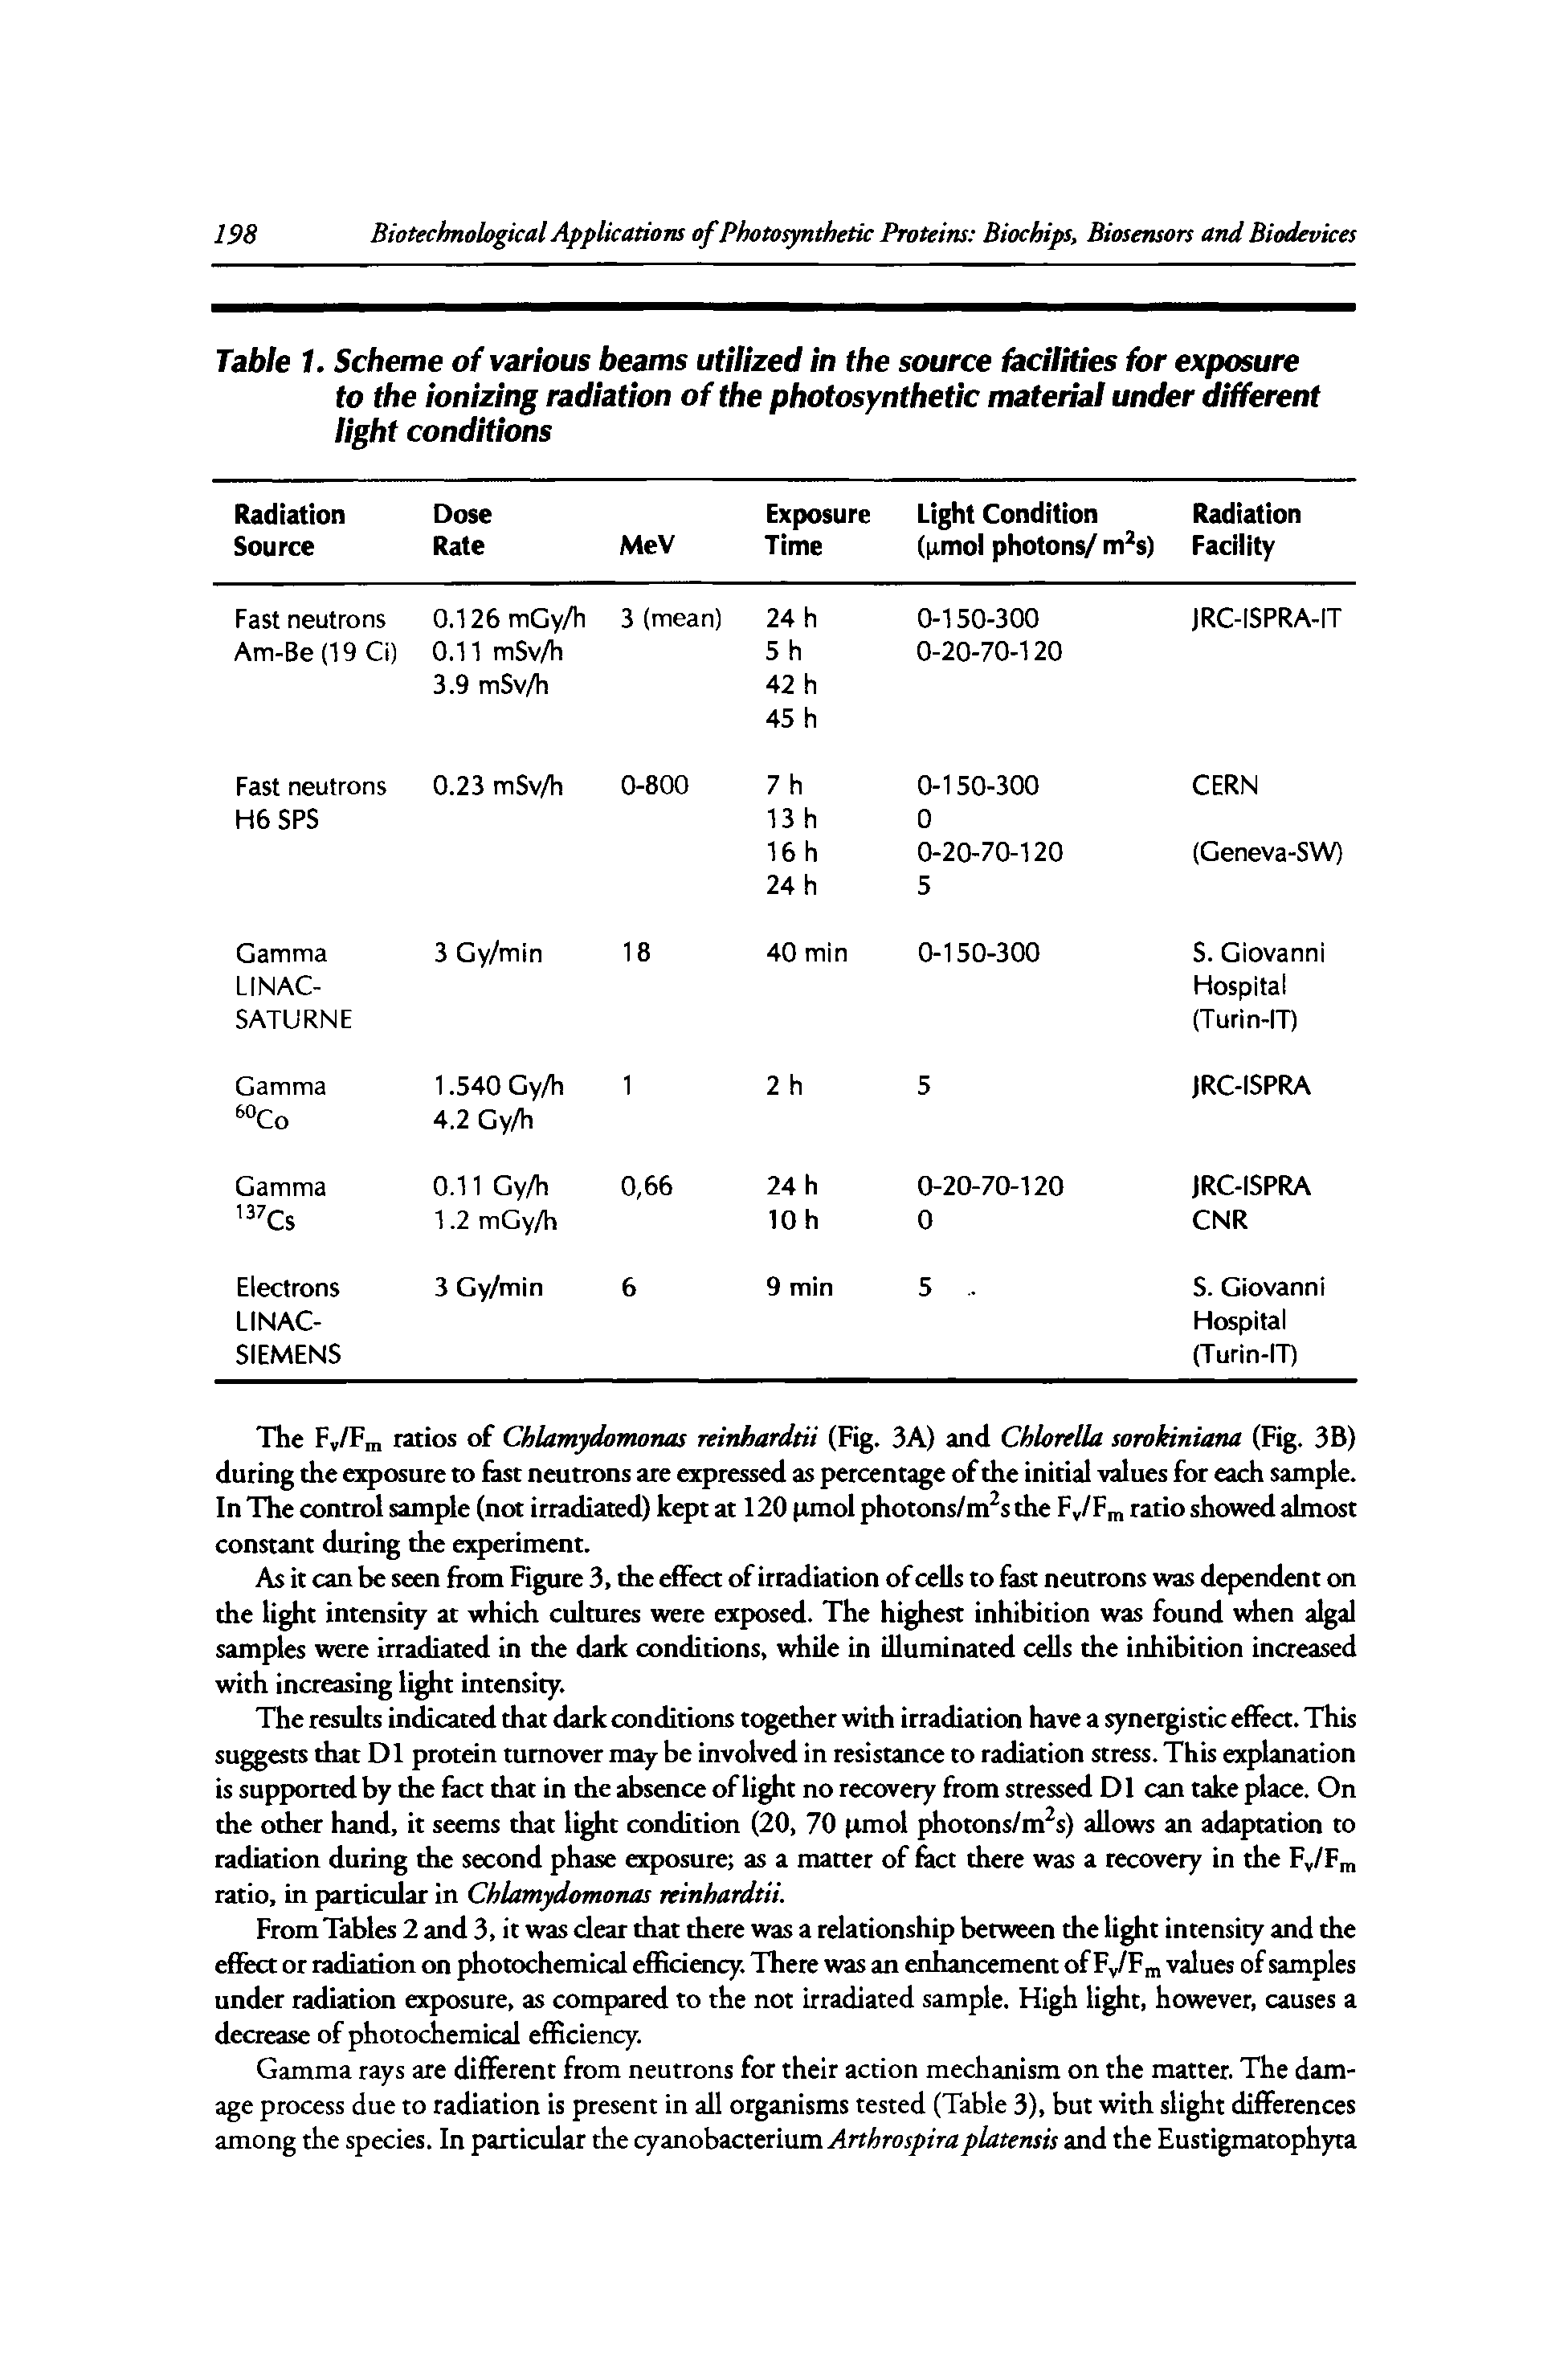 Table 1. Scheme of various beams utilized in the source facilities for exposure to the ionizing radiation of the photosynthetic material under different light conditions...